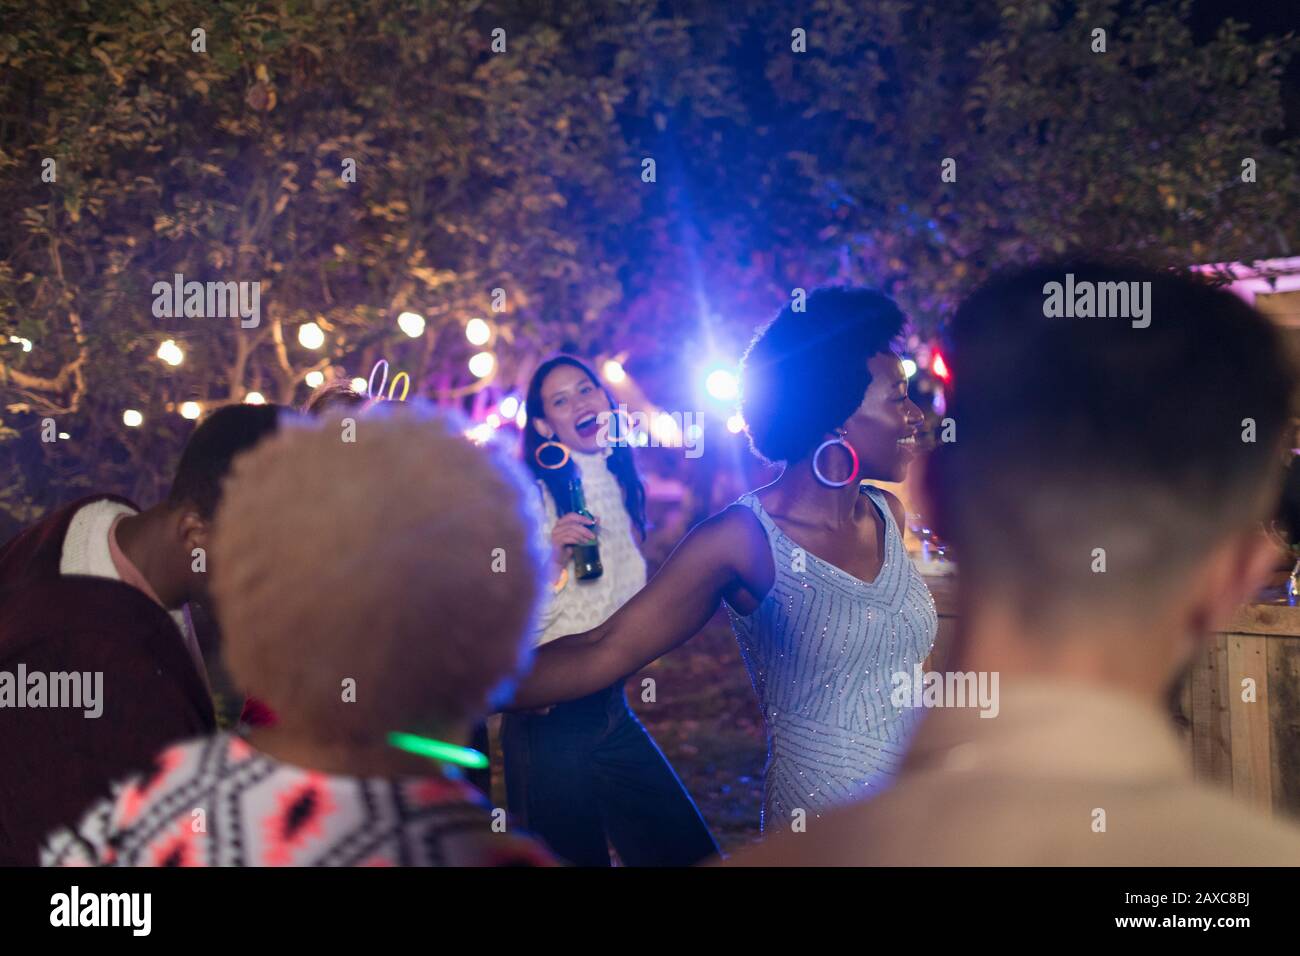 Playful friends drinking and dancing at garden party Stock Photo